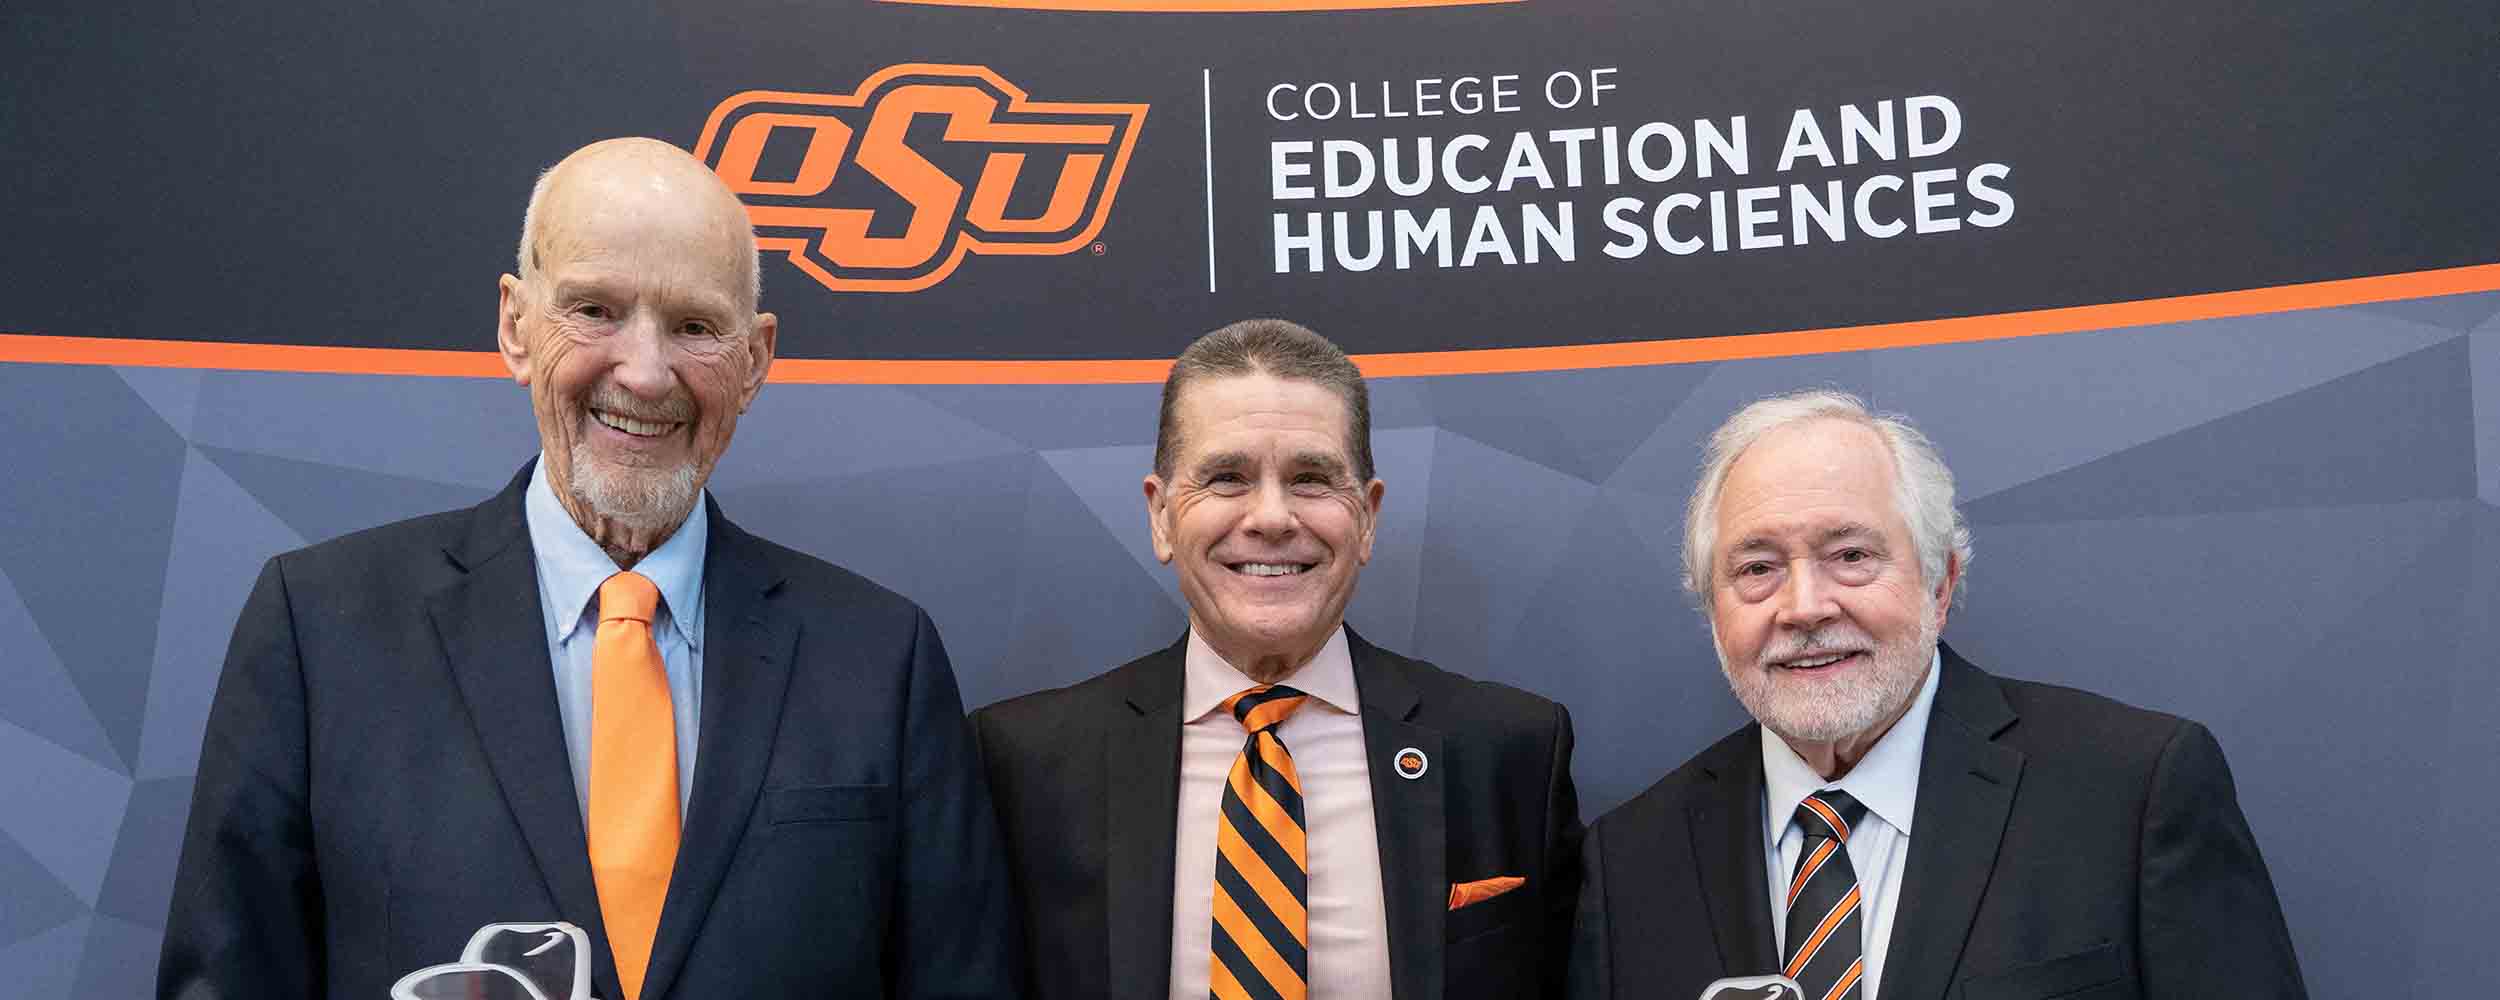 The College of Education and Human Sciences added two new members to its Hall of Fame and honored four Outstanding Alumni Award recipients during the 2022 Hall of Fame banquet on April 29 in the Nancy Randolph Davis building on the Stillwater campus.